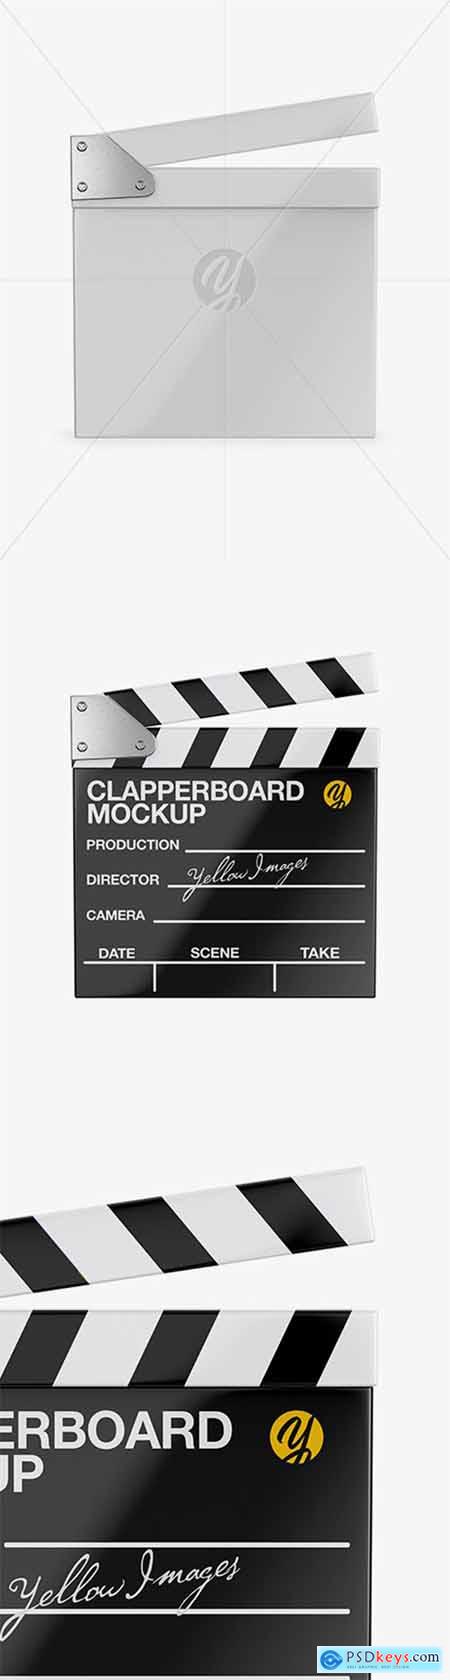 Glossy Clapperboard Mockup - Front View 26043